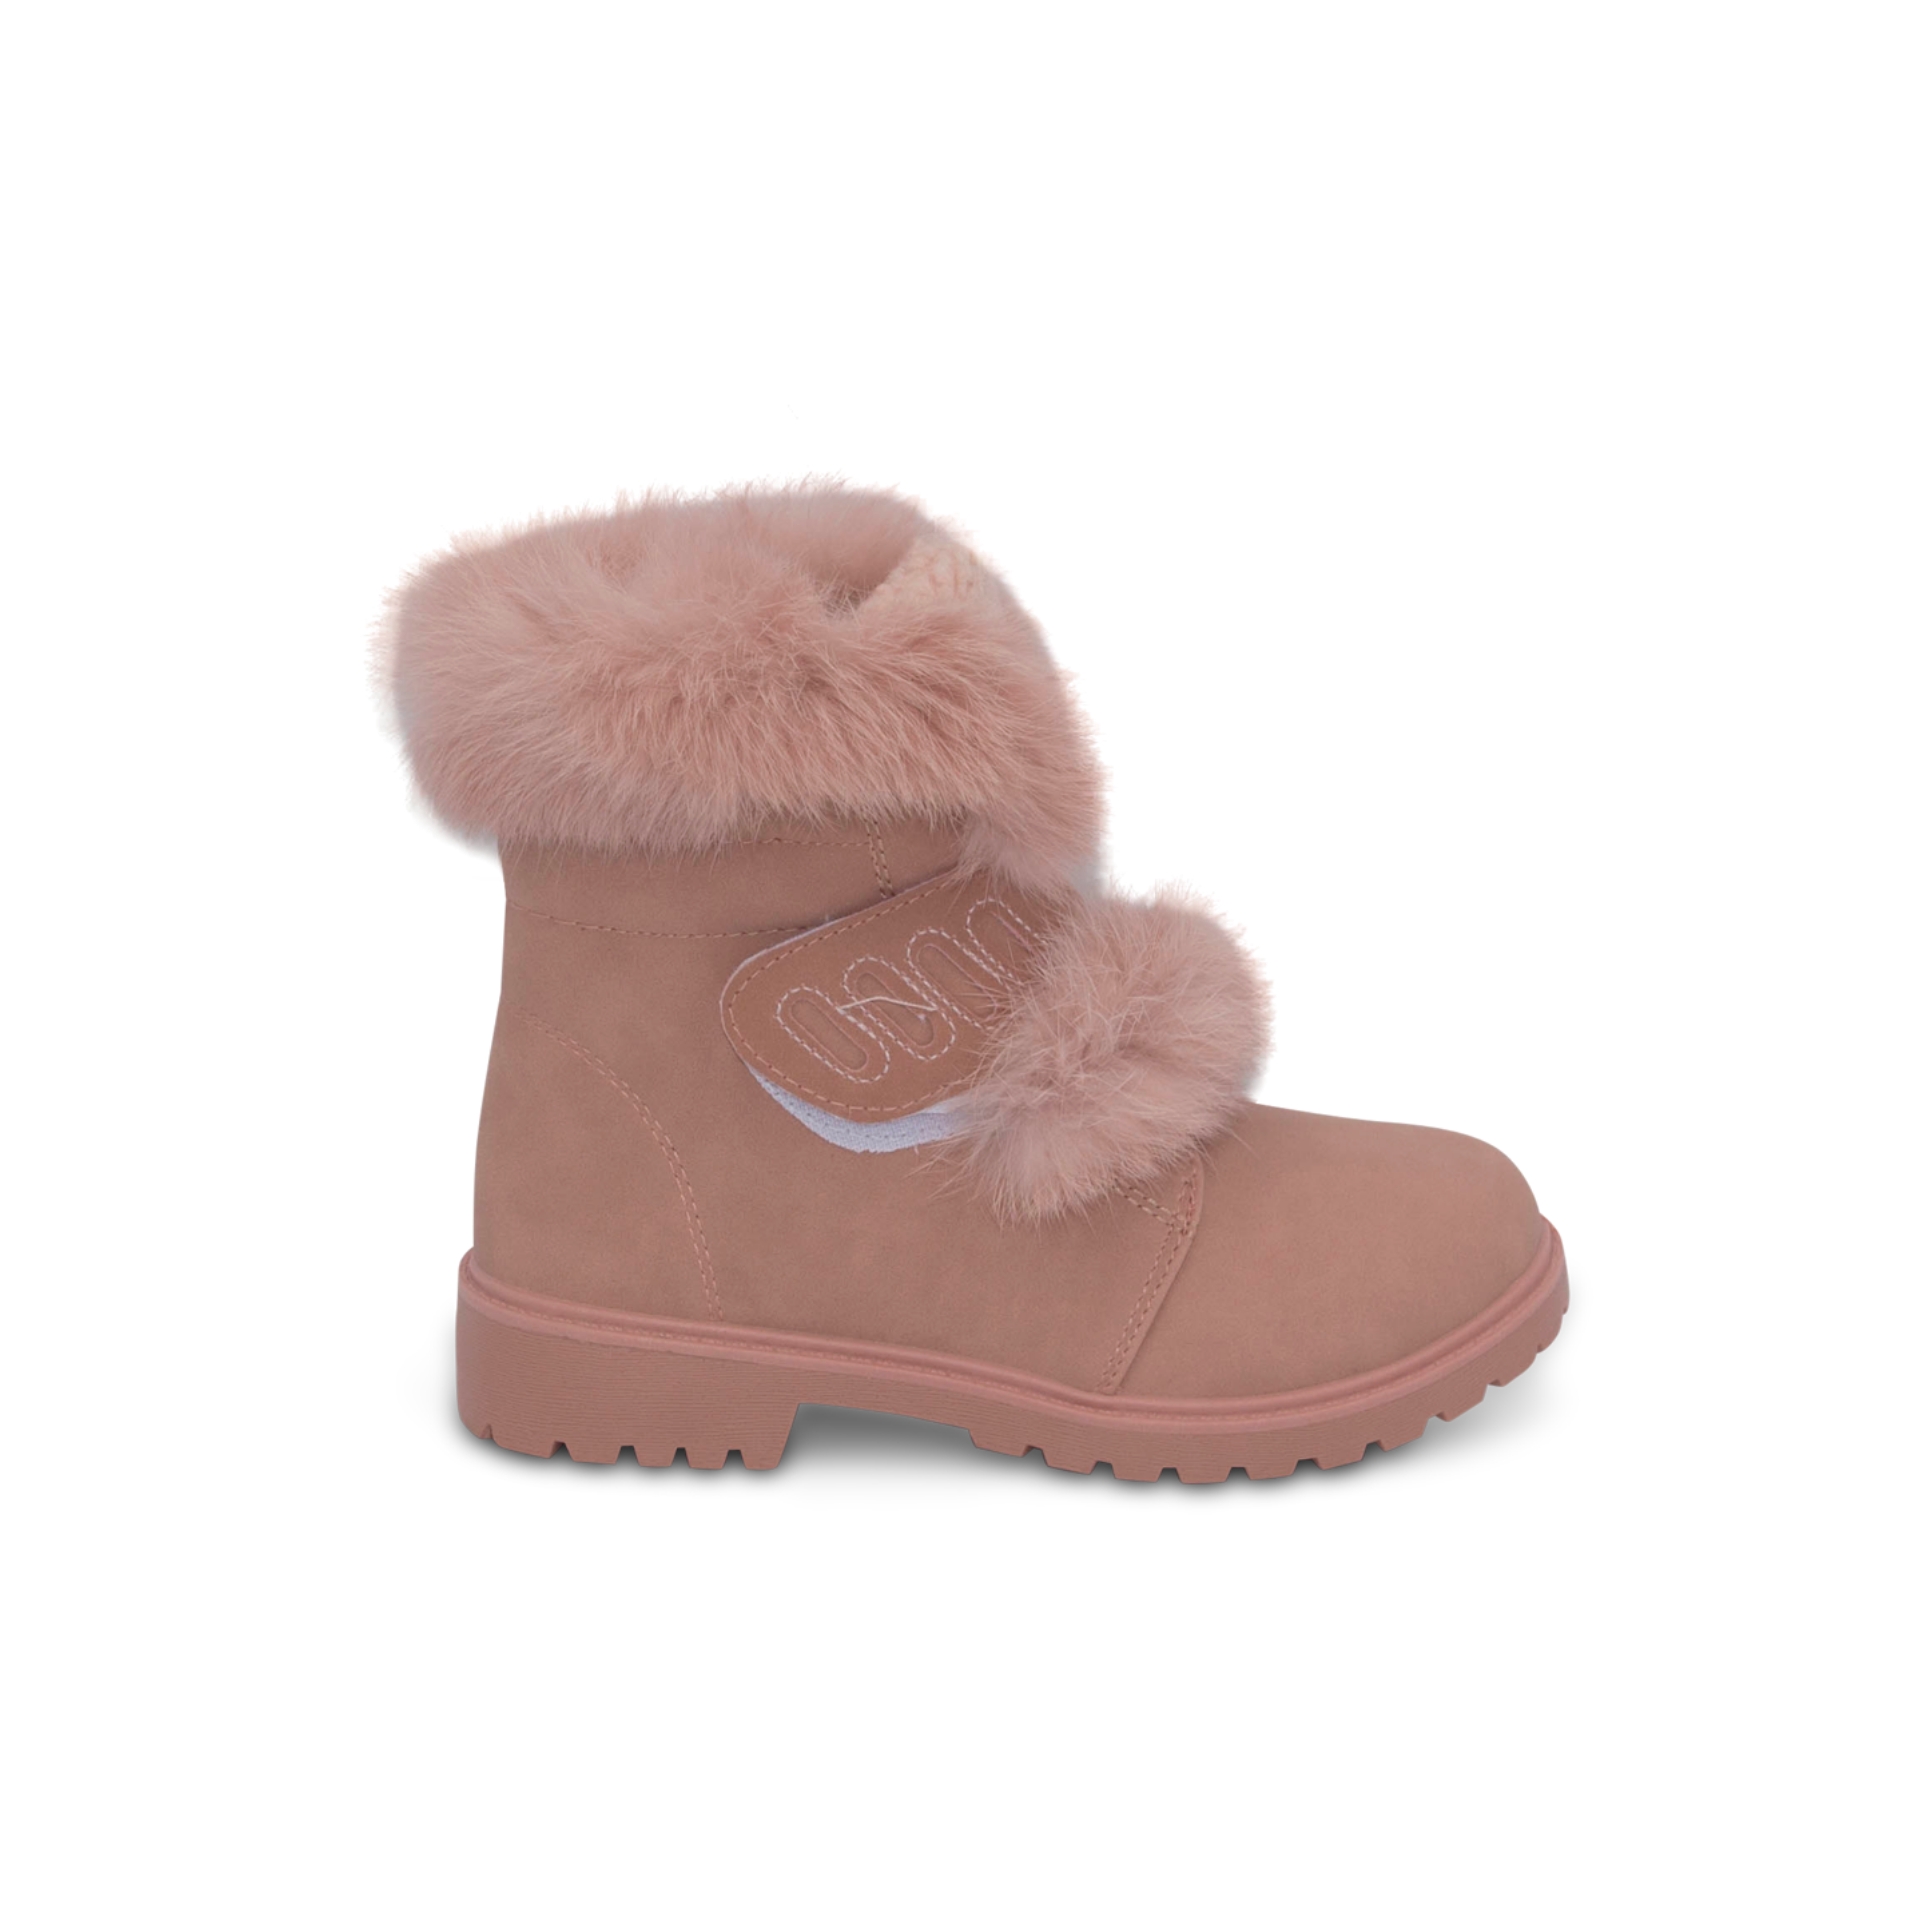 Kids Fluffy Winter Boots R501 | Rentoes